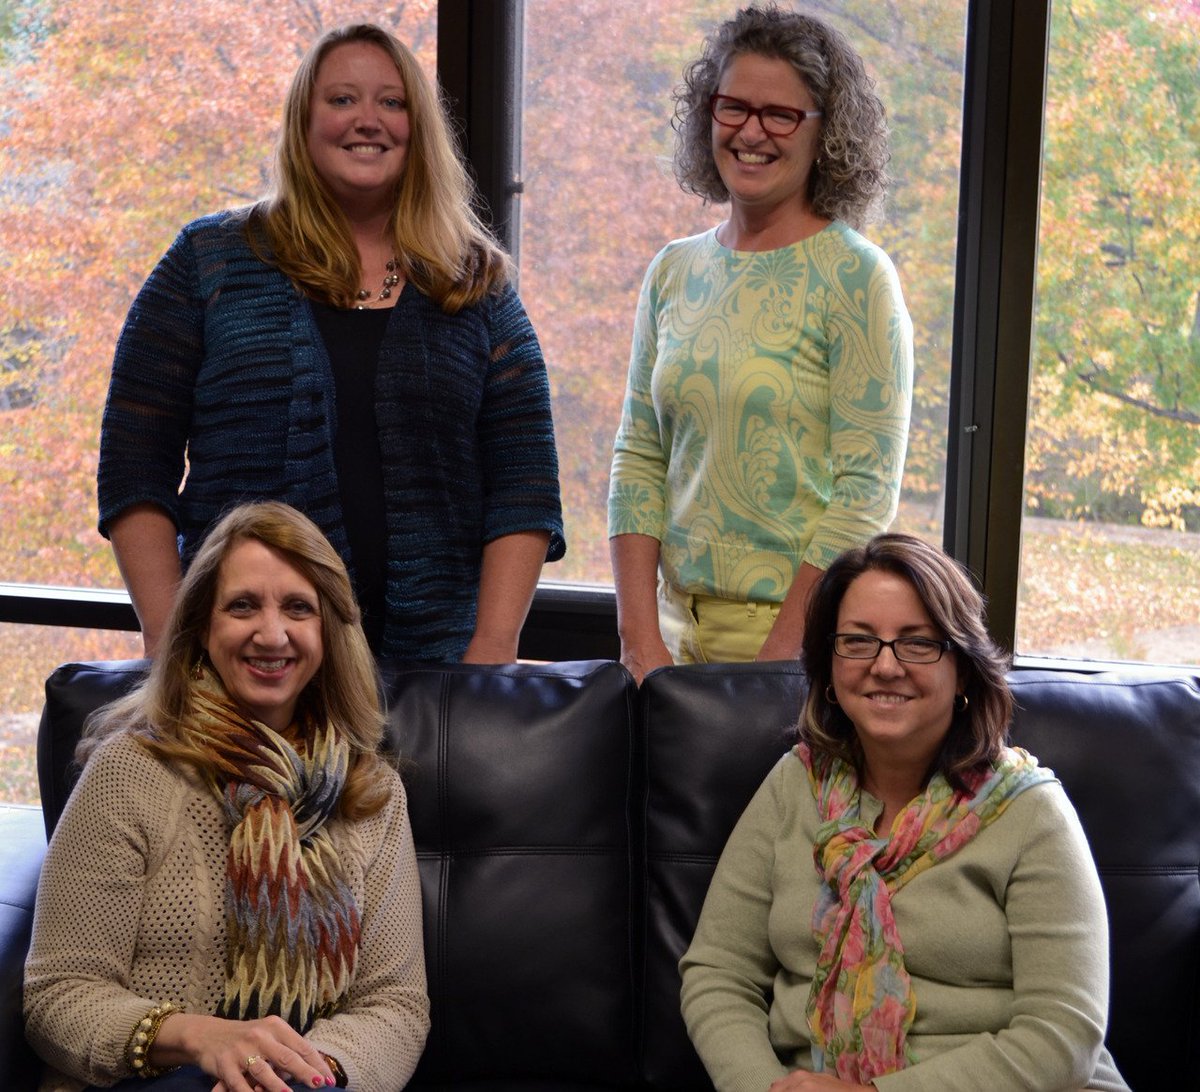 3 #KentState faculty present #palliativecareresearch w/ @UrsulineCampus faculty @HospiceWR bit.ly/2bb5TqE